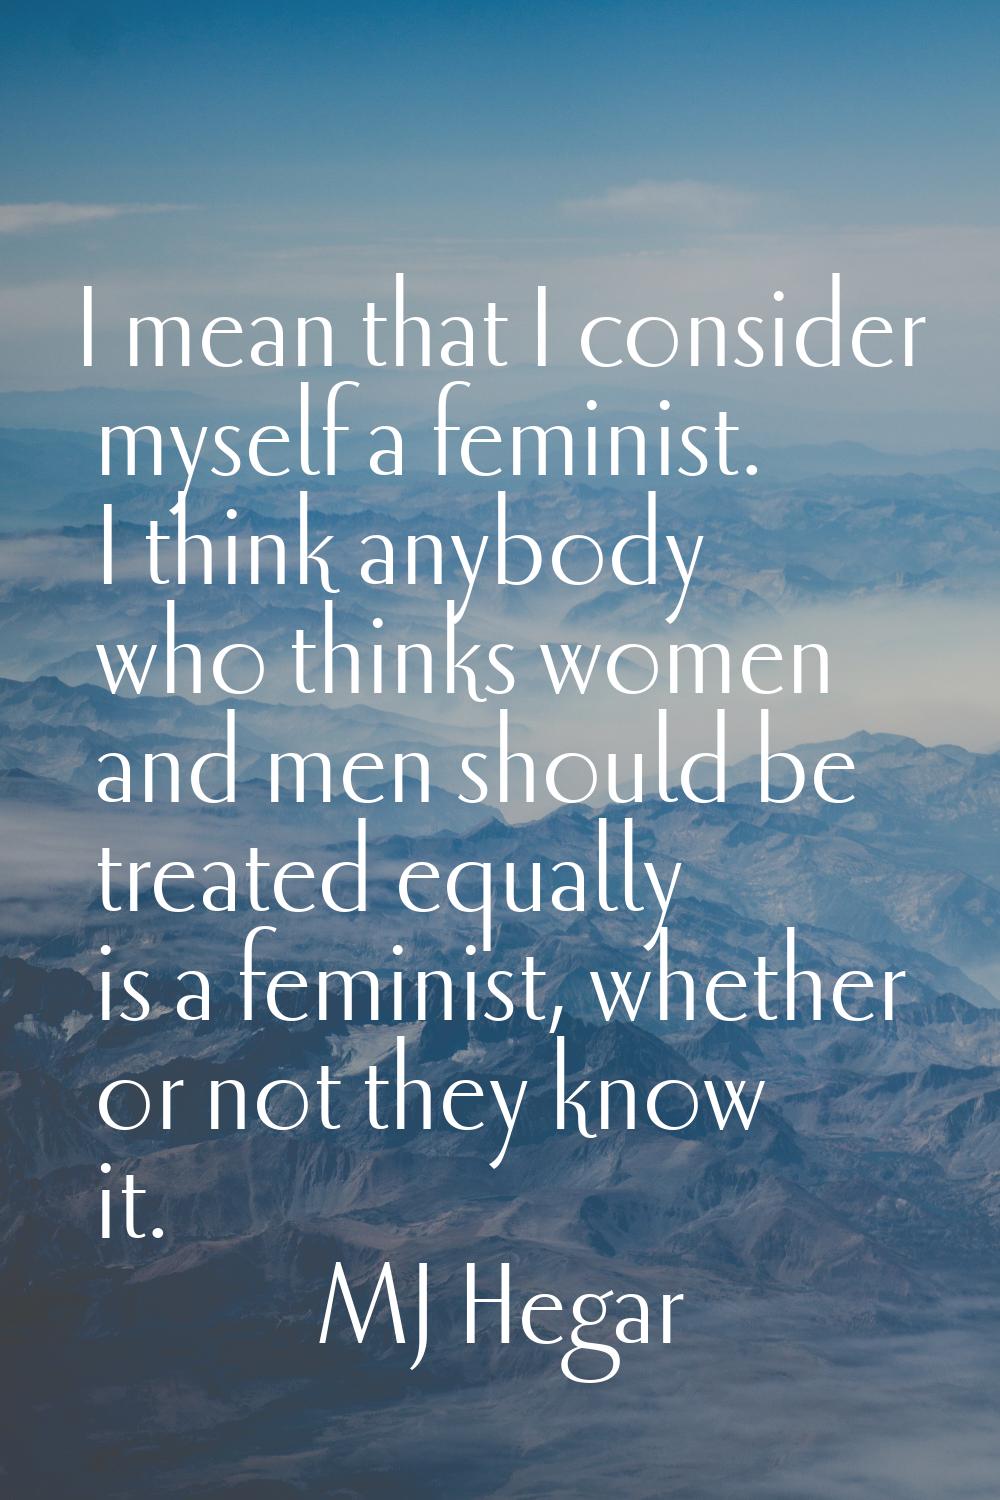 I mean that I consider myself a feminist. I think anybody who thinks women and men should be treate